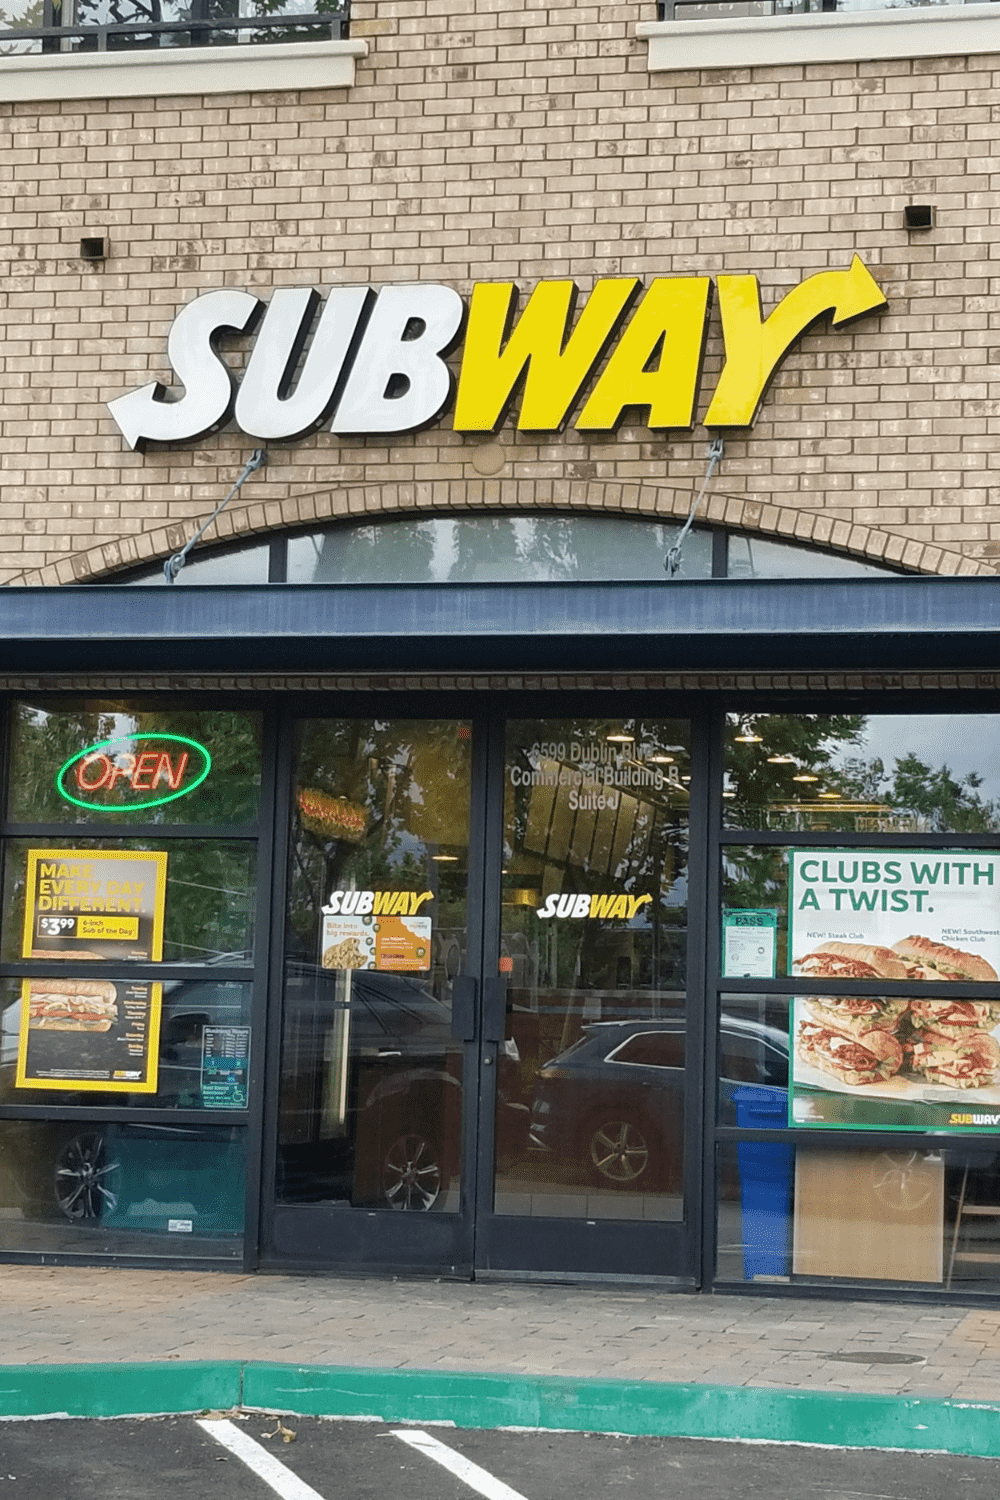 Where Does Subway Get Its Meat In 2022? (Your Full Guide)